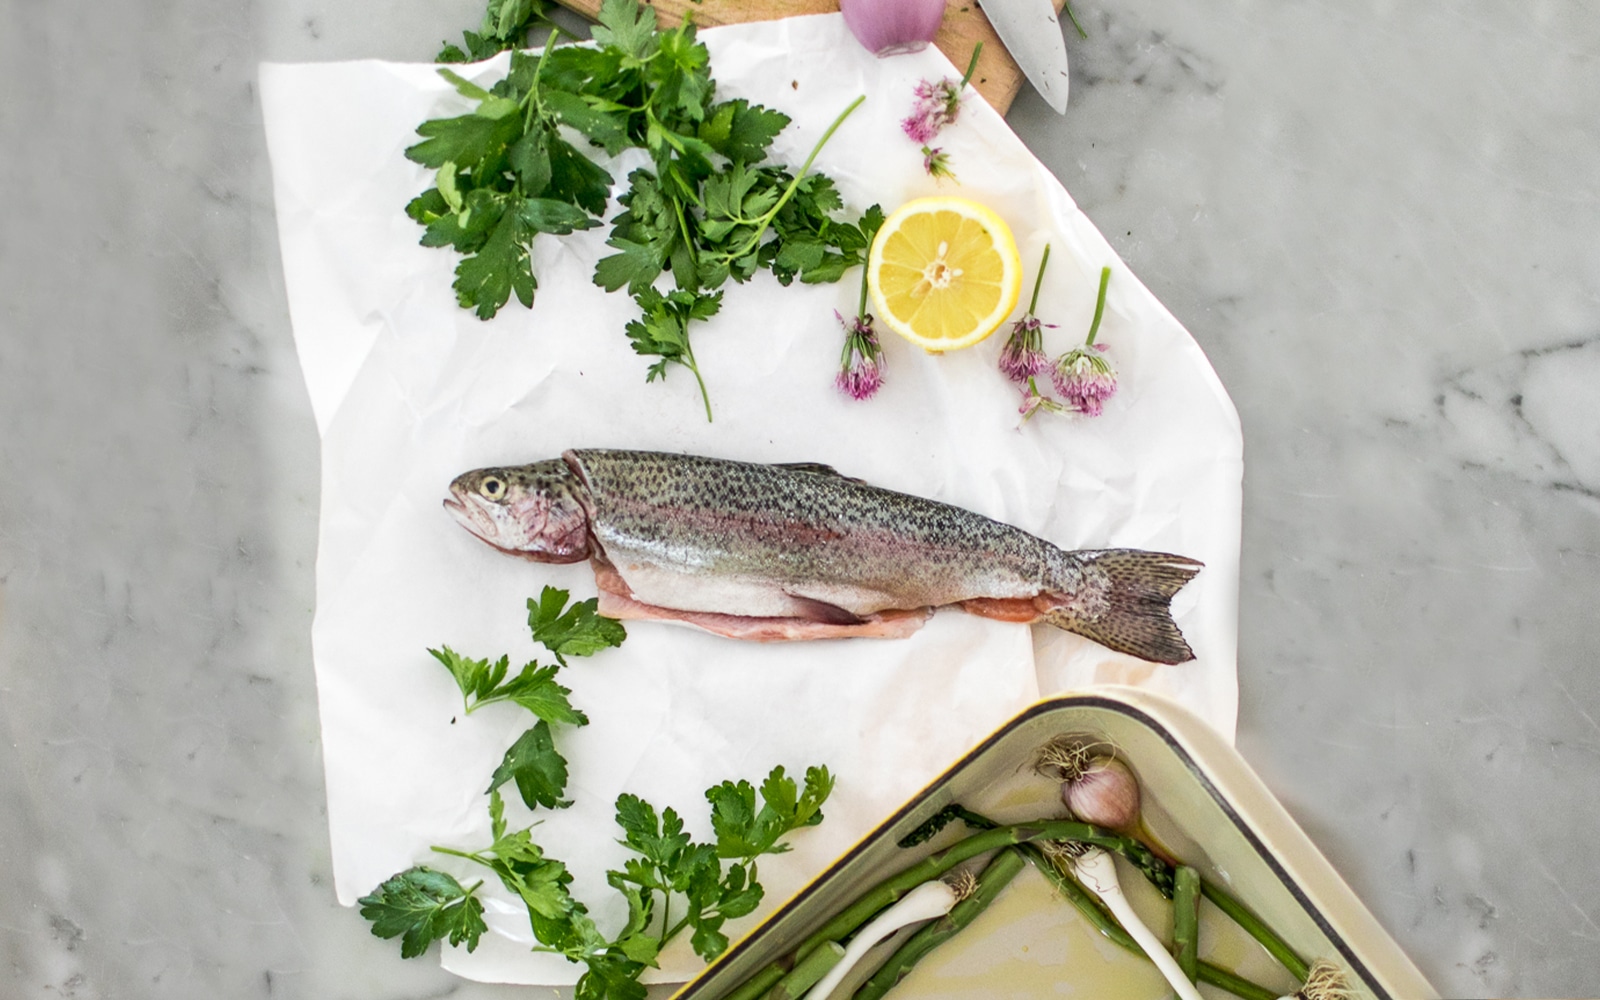 A Recipe for a simple way to bake a whole Rainbow Trout this summer. Get the Recipe on The Fresh Exchange.